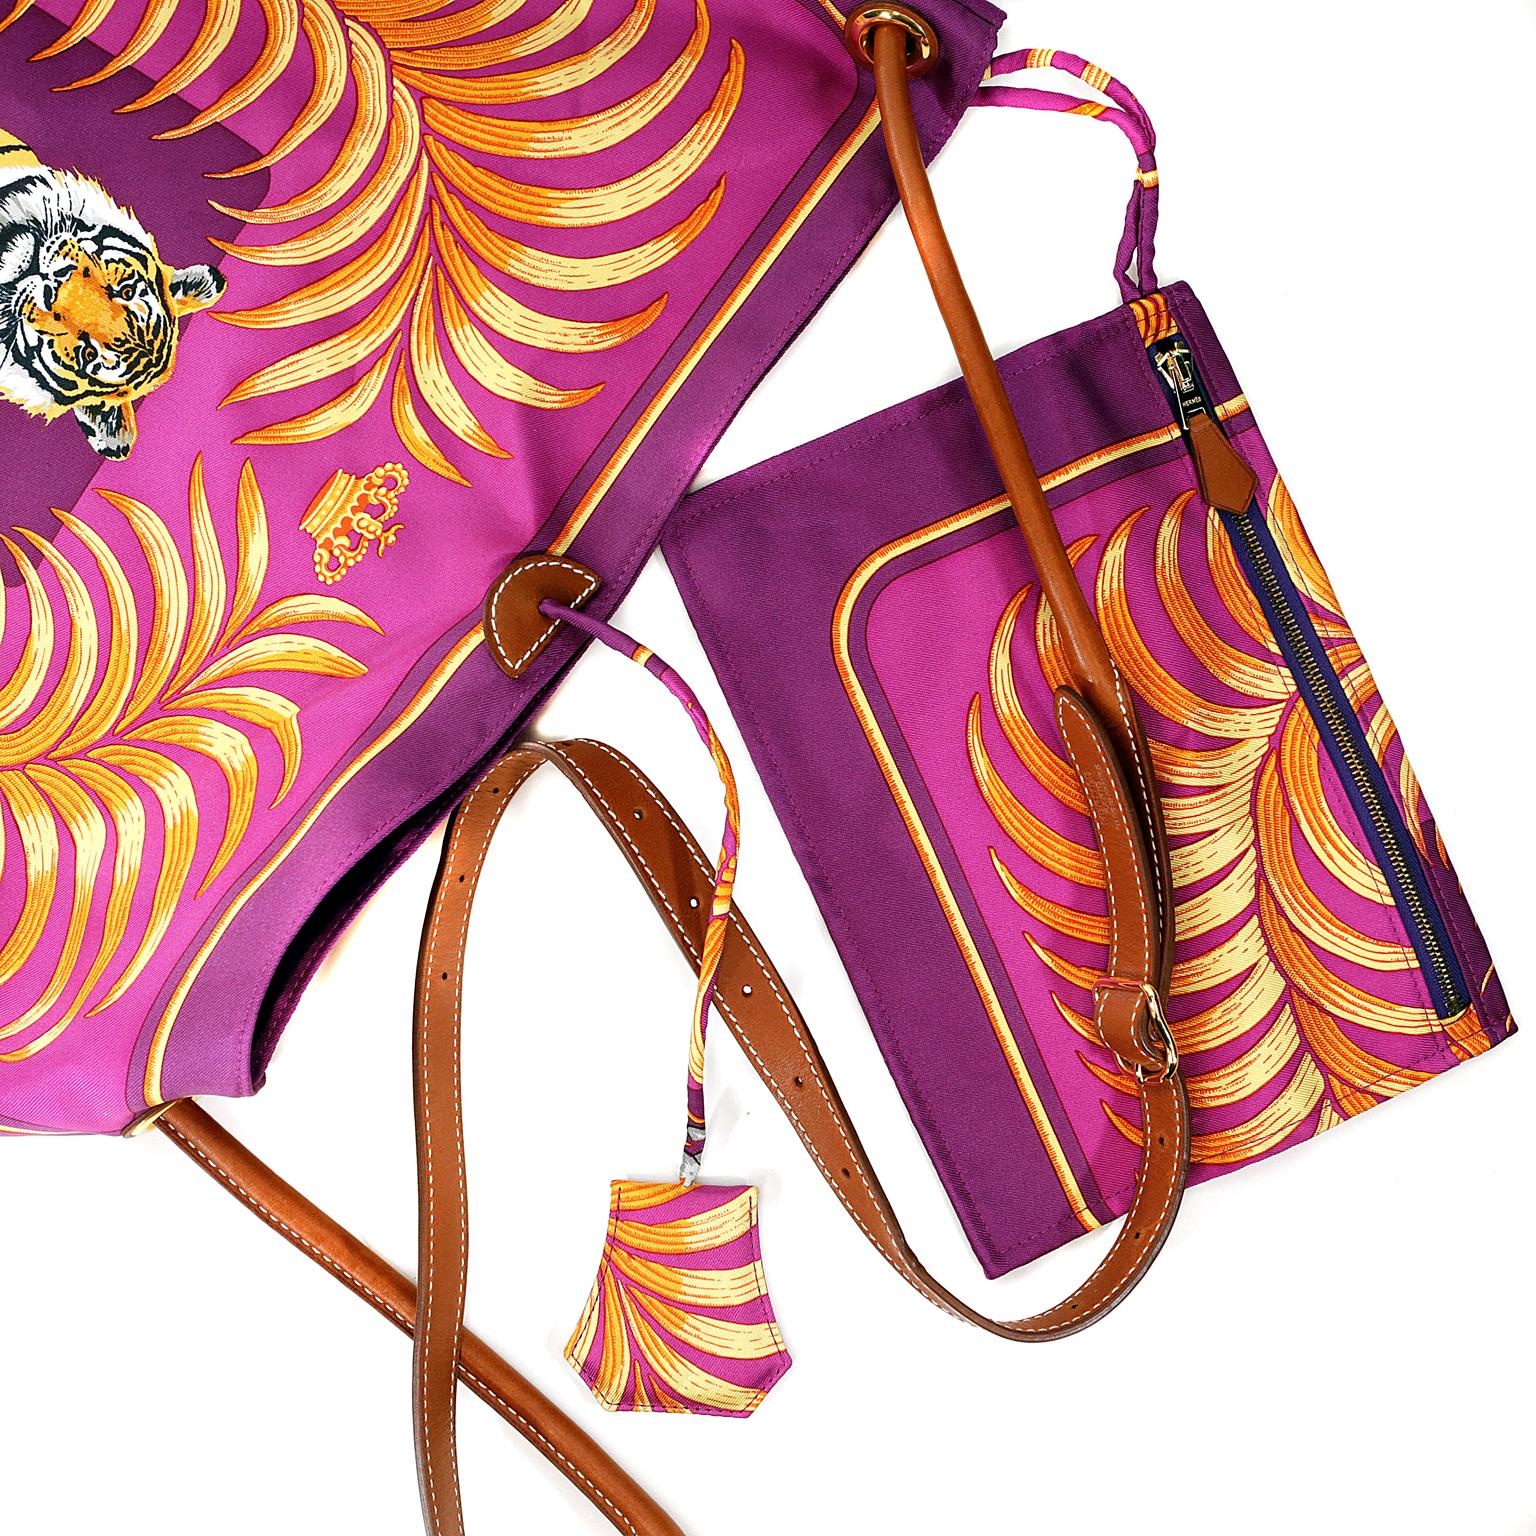 Hermès Silk City Tiger Royal Shoulder Bag- Pristine Condition, appearing never carried
Collectible and rare style in brilliant shades of fuchsia, purple, gold and orange.
Silk body features a royal tiger in repose.  Sturdy reinforced corners in